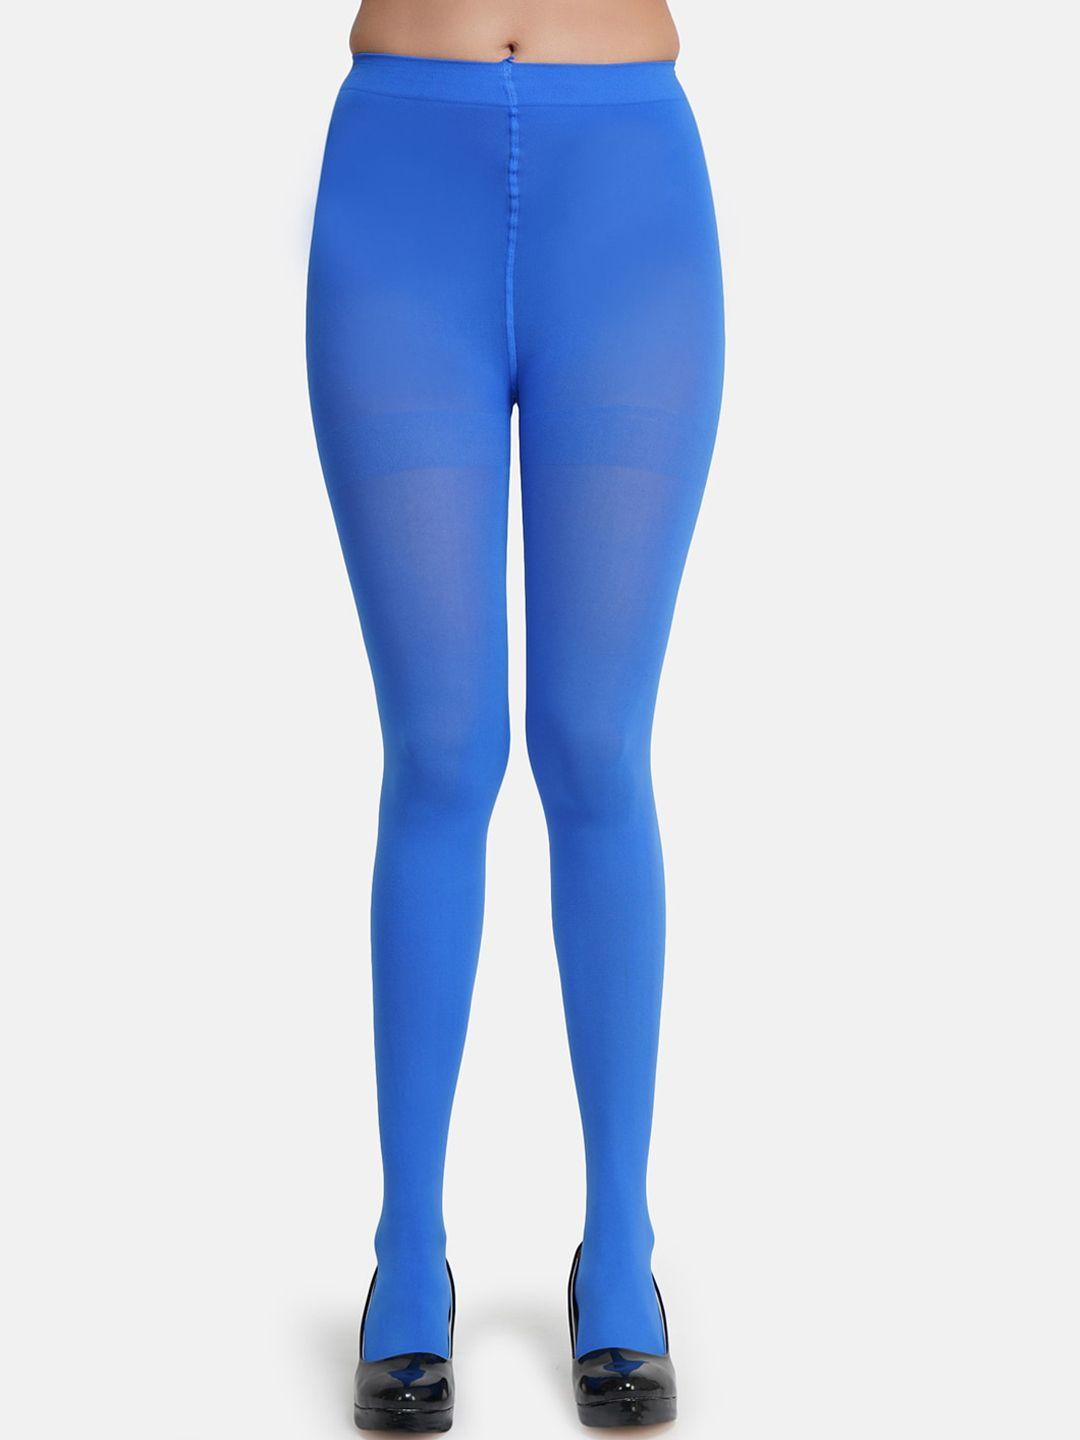 n2s next2skinwomen blue solid opaque pantyhose stockings